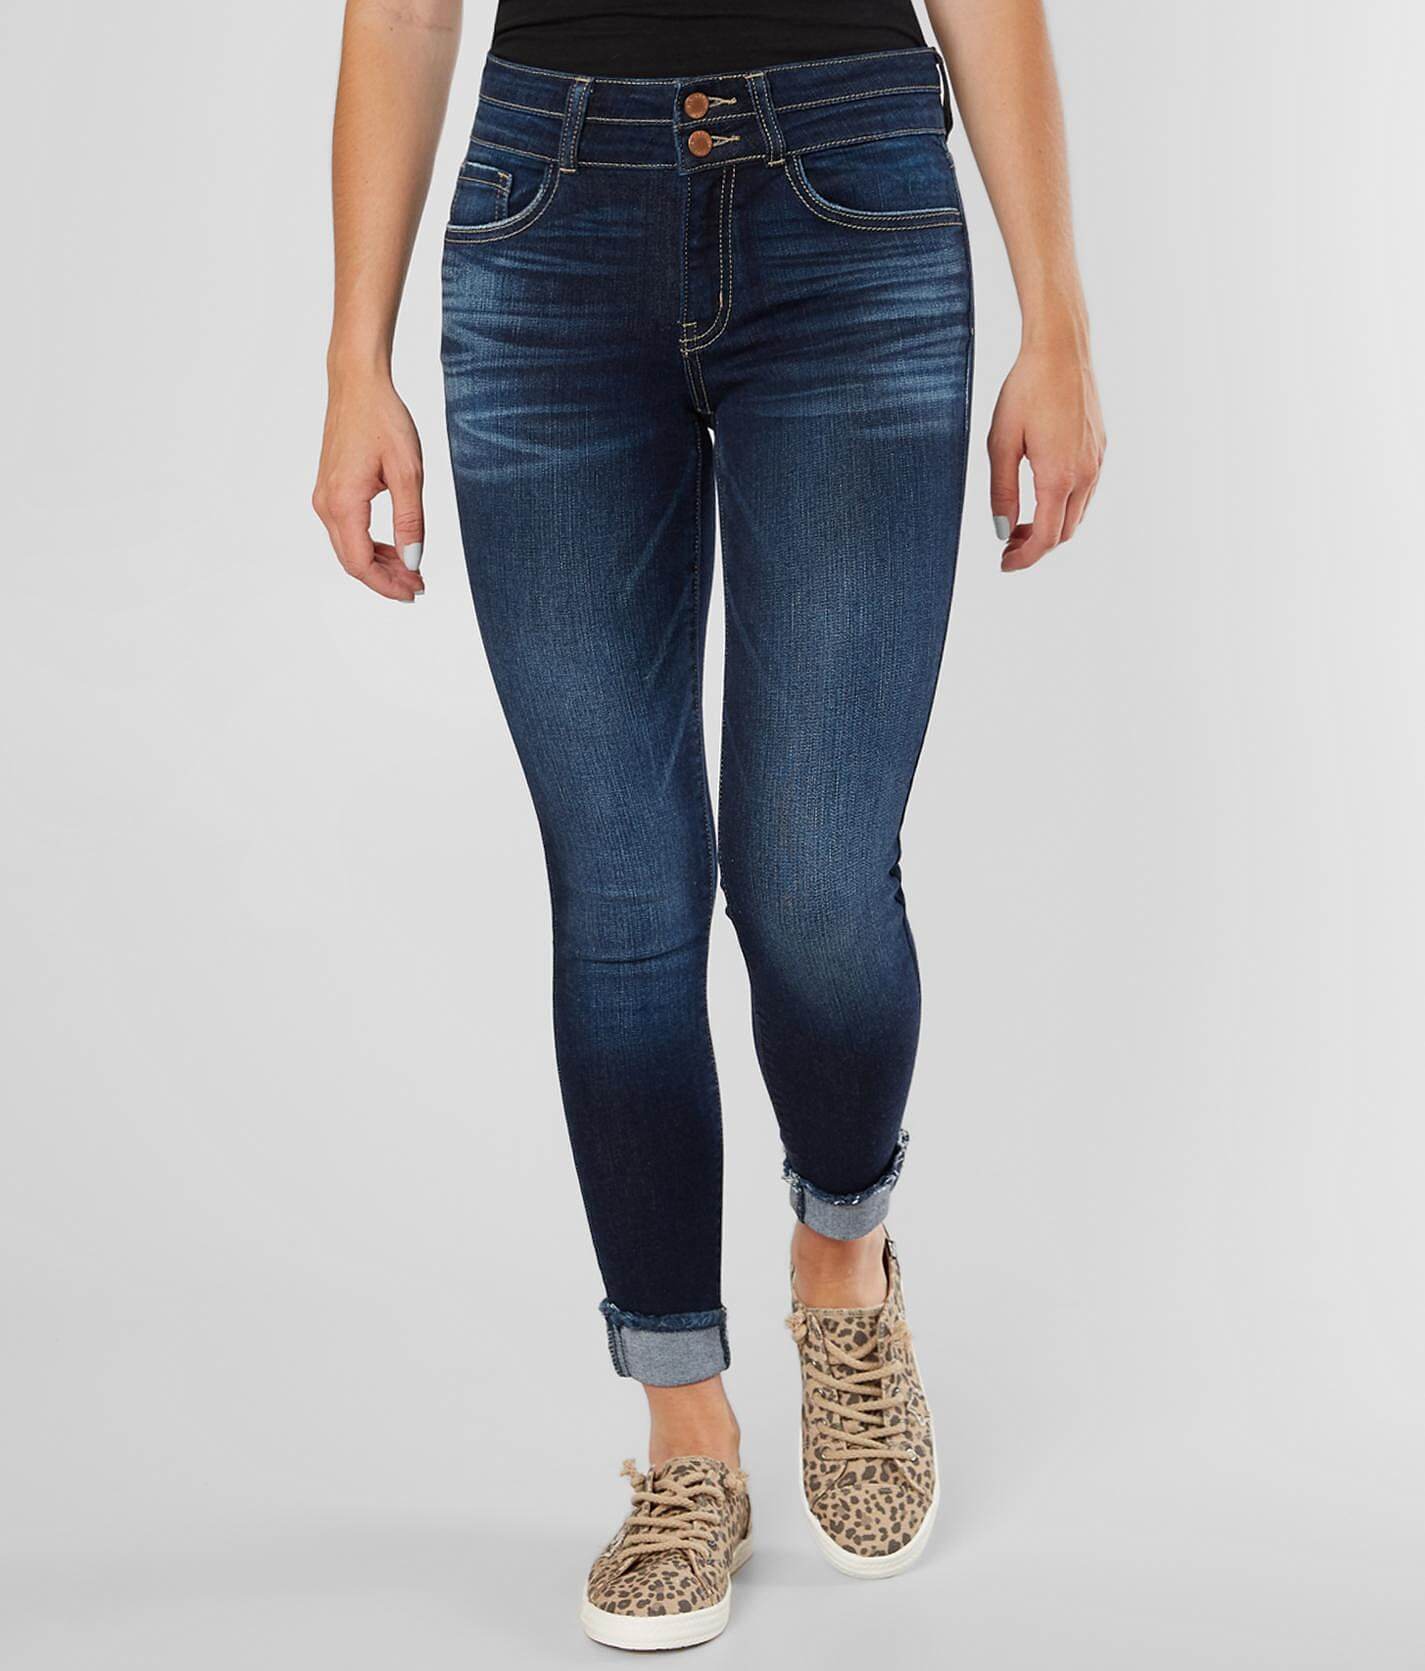 women's rolled up skinny jeans